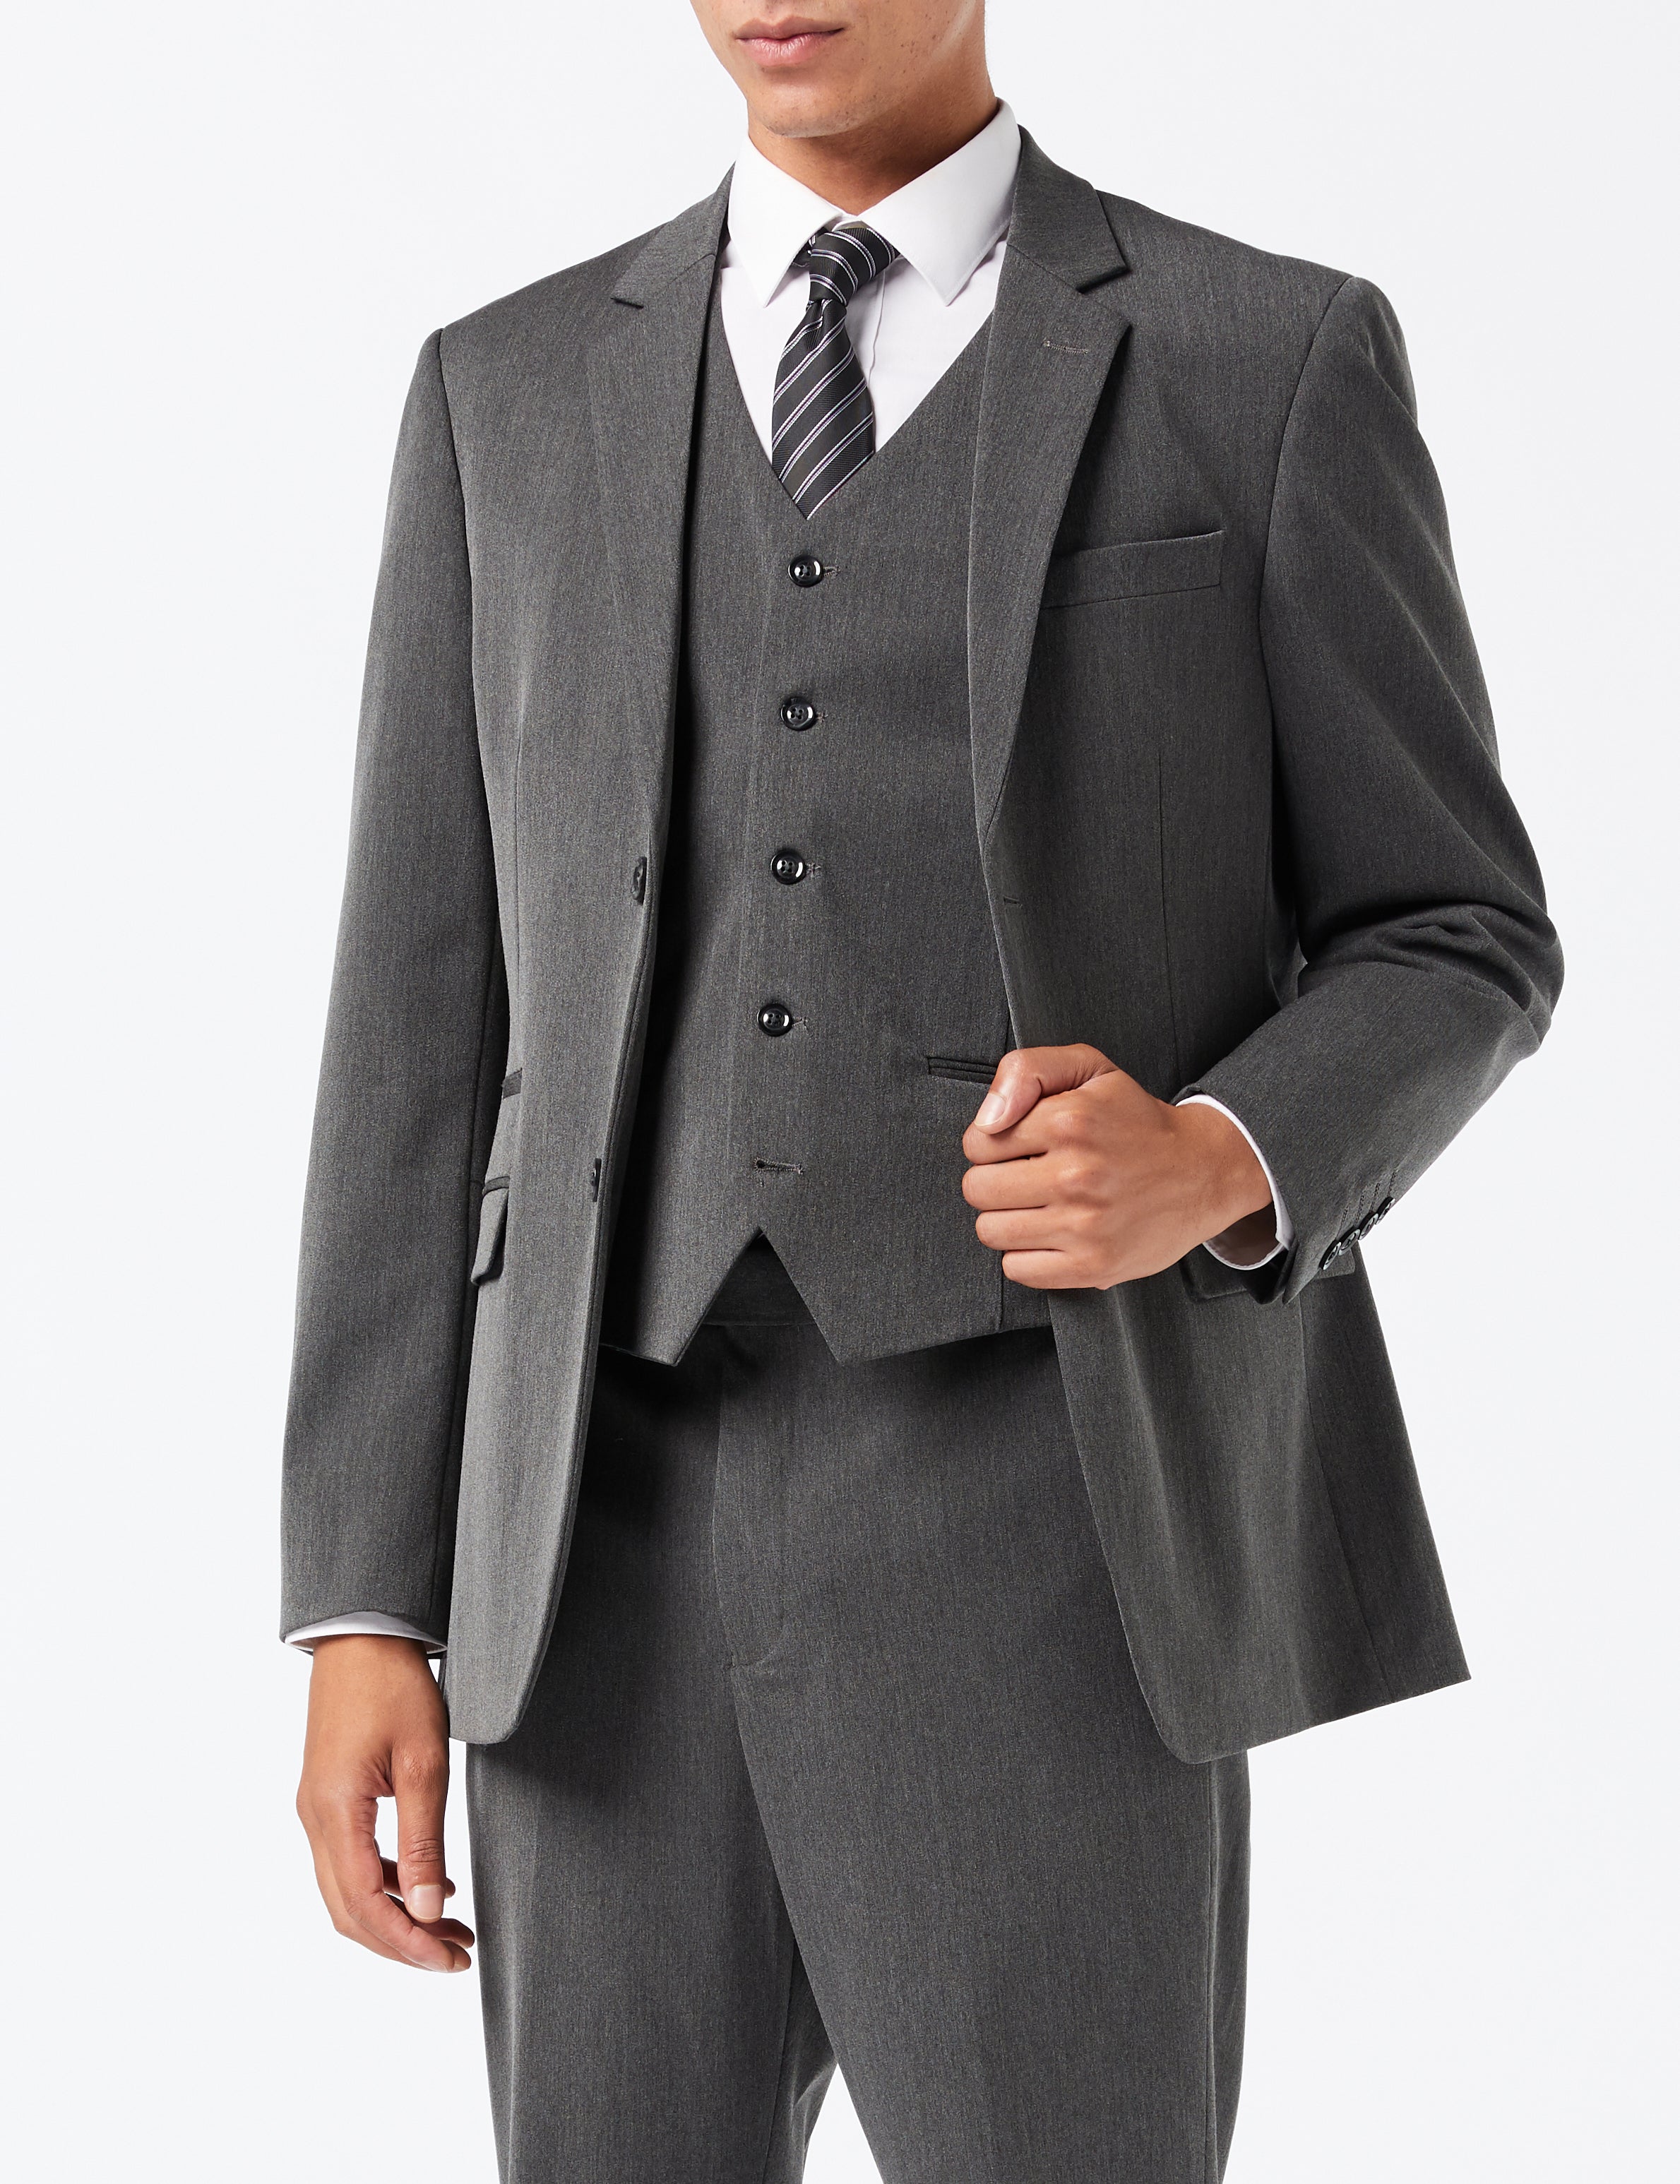 J ROSS - CHARCOAL GREY BUSINESS SUIT – XPOSED